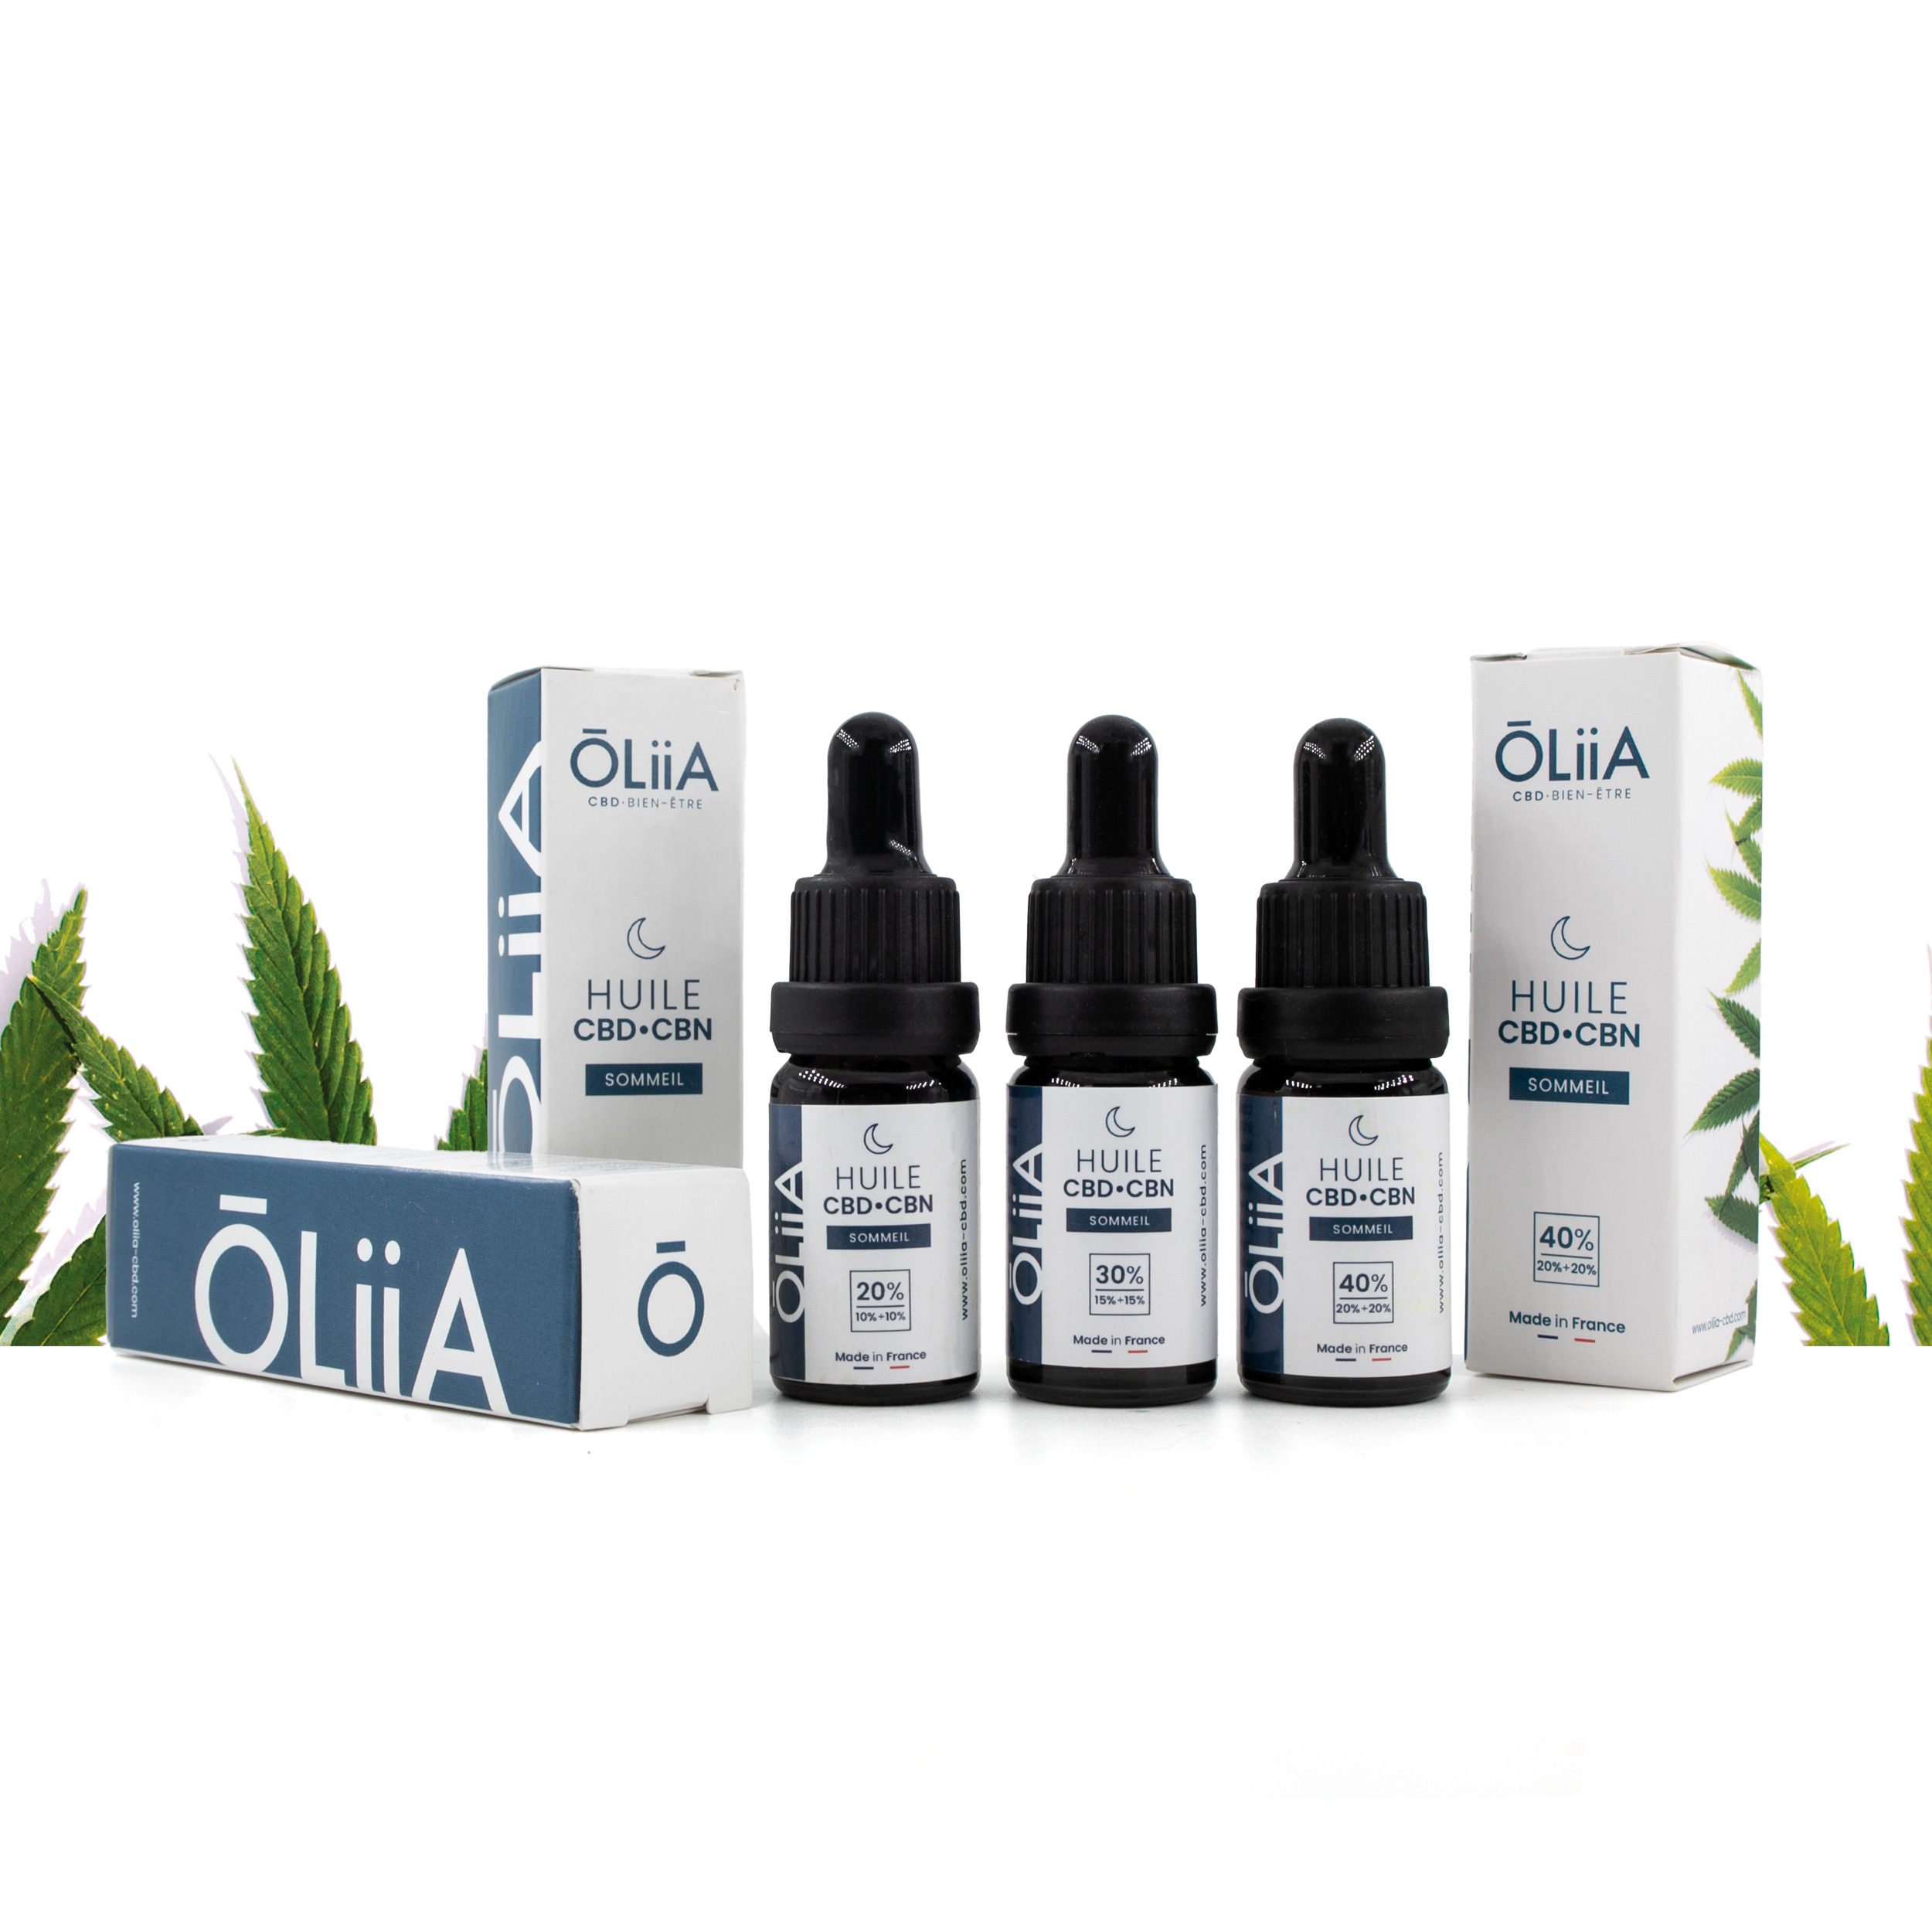 All-huile-oliia-sommeil